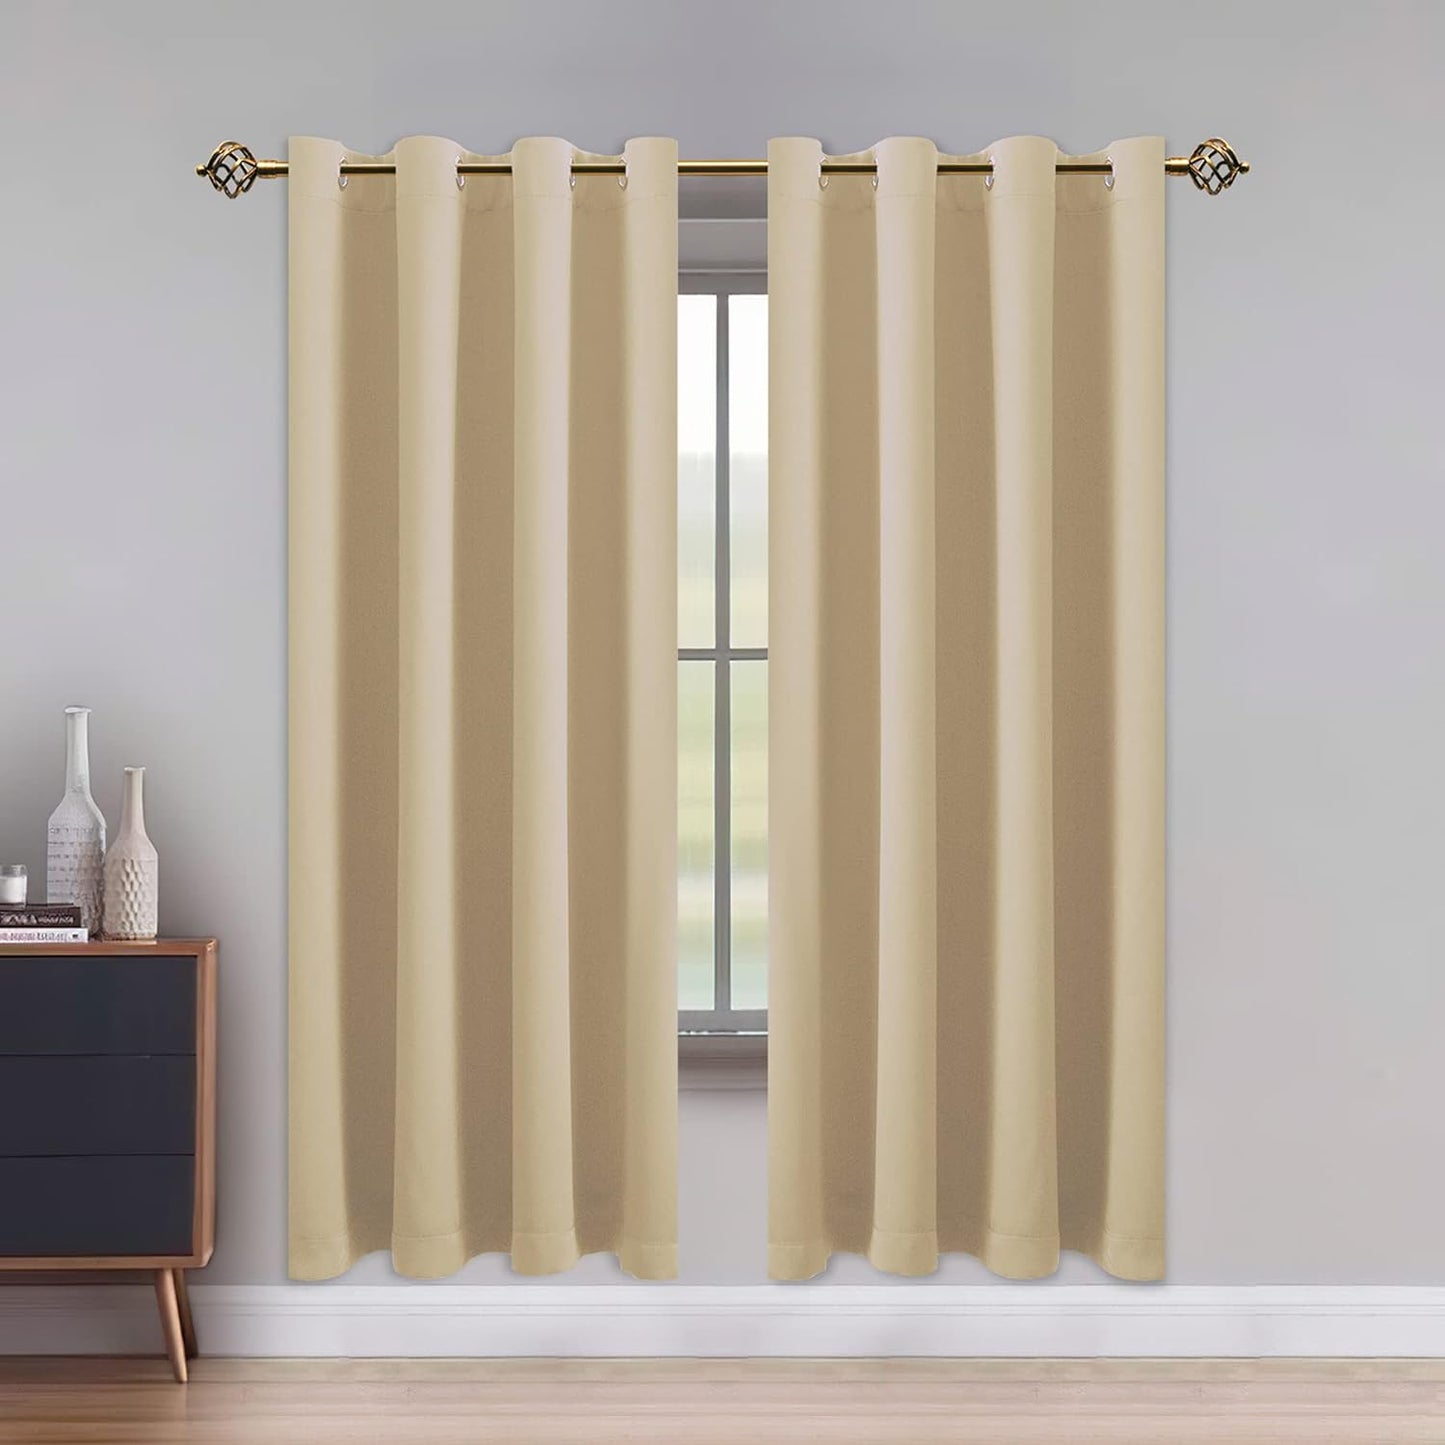 LUSHLEAF Blackout Curtains for Bedroom, Solid Thermal Insulated with Grommet Noise Reduction Window Drapes, Room Darkening Curtains for Living Room, 2 Panels, 52 X 63 Inch Grey  SHEEROOM Beige 52 X 72 Inch 